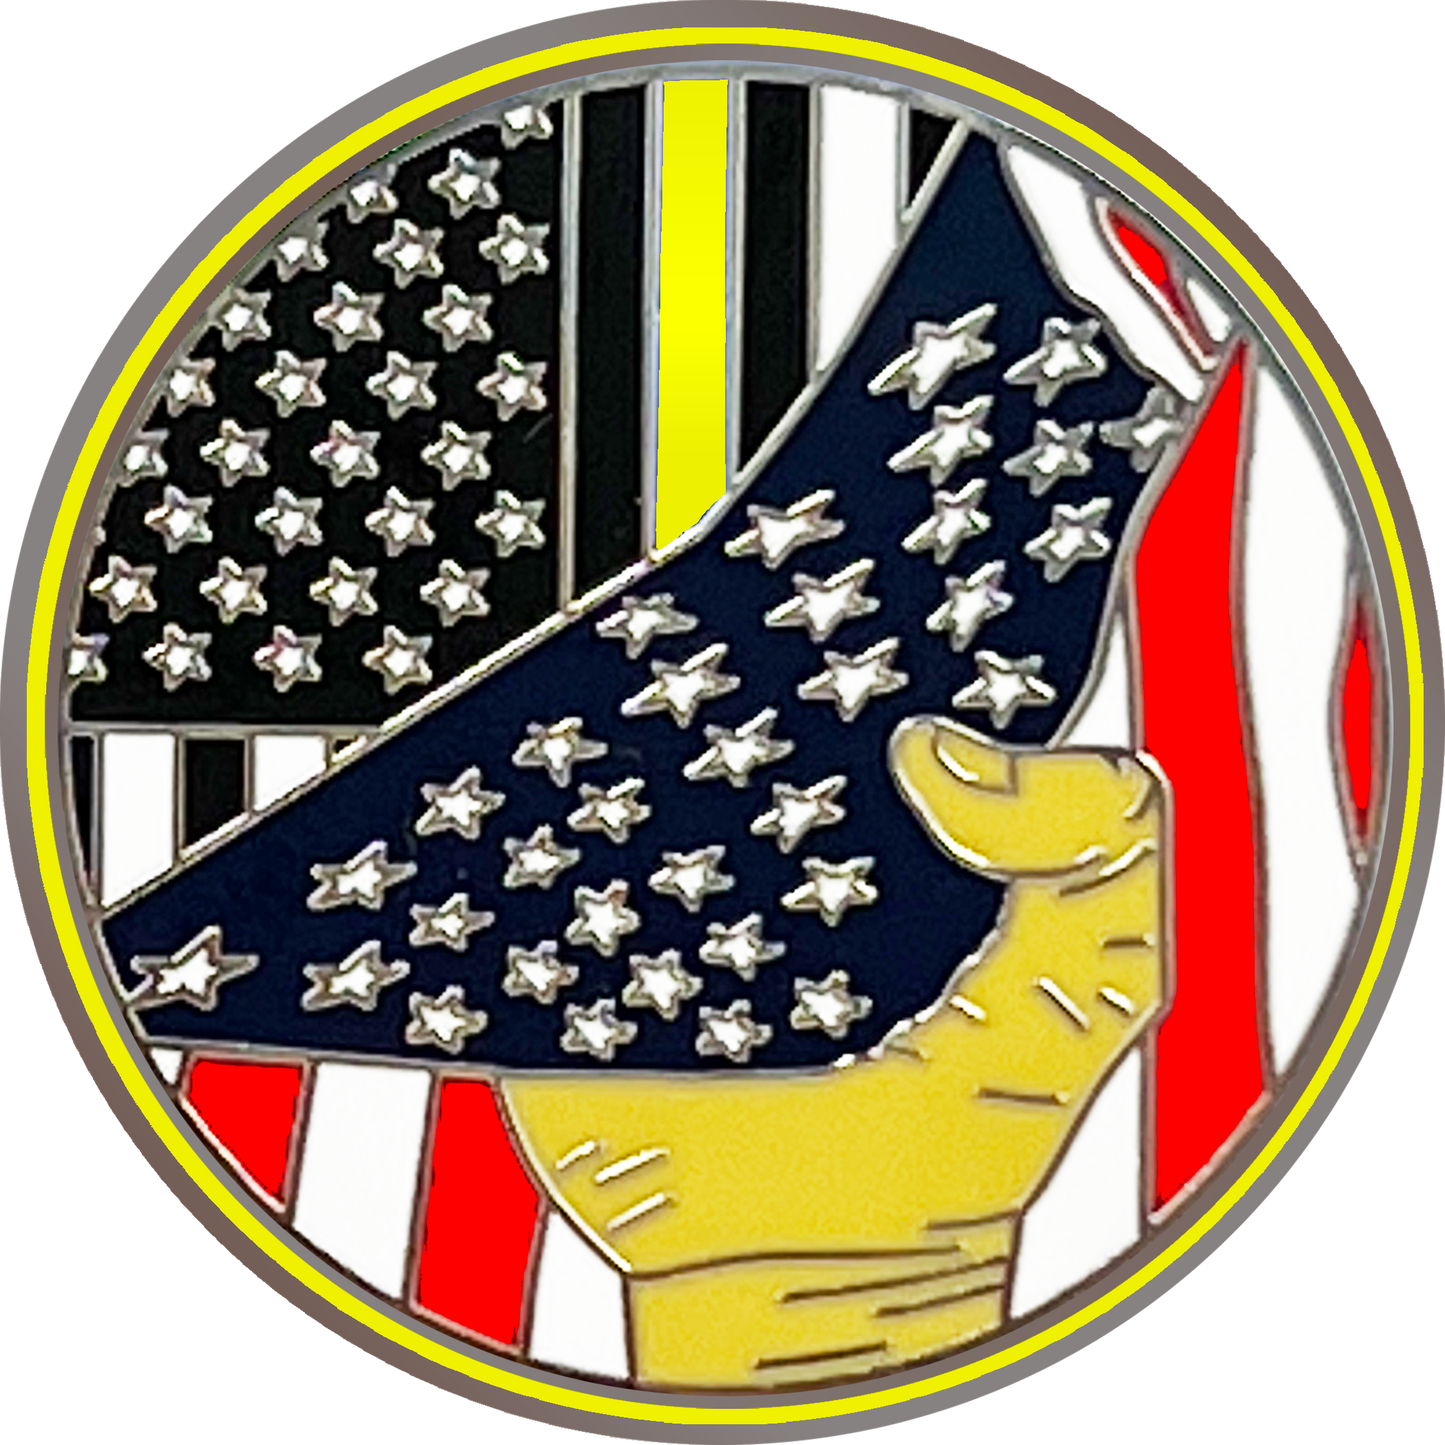 PBX-002-L Thin Gold Line American Flag Police 911 Emergency Dispatcher Lapel Pin hand pulling down Yellow Line Trucker